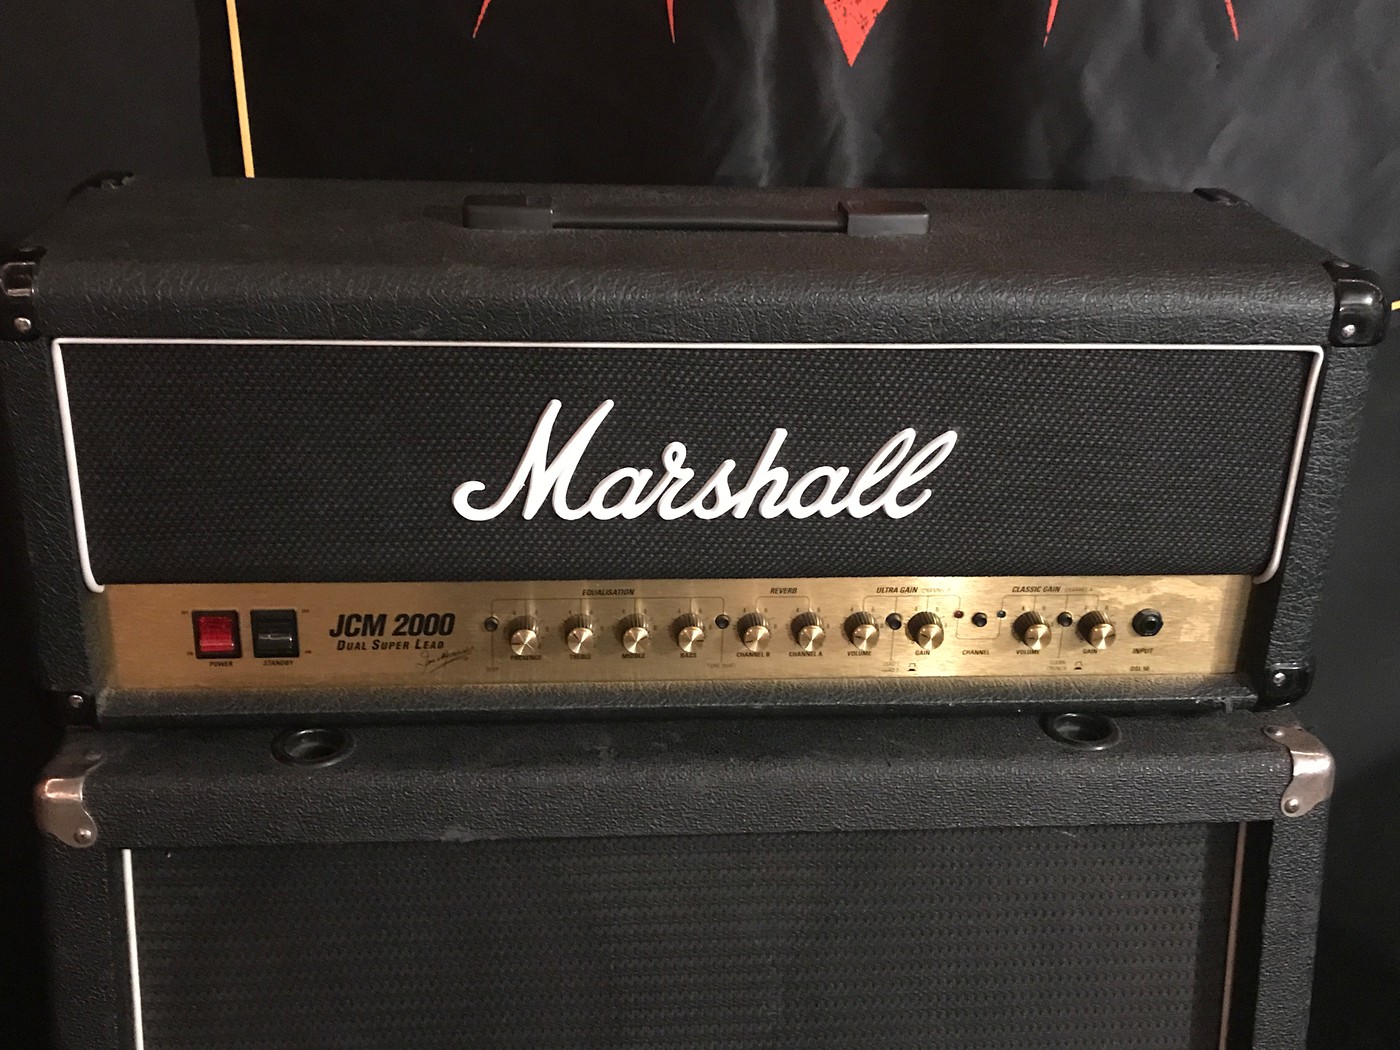 Marshall JCM 2000 DSL 50w? | The Gear Page